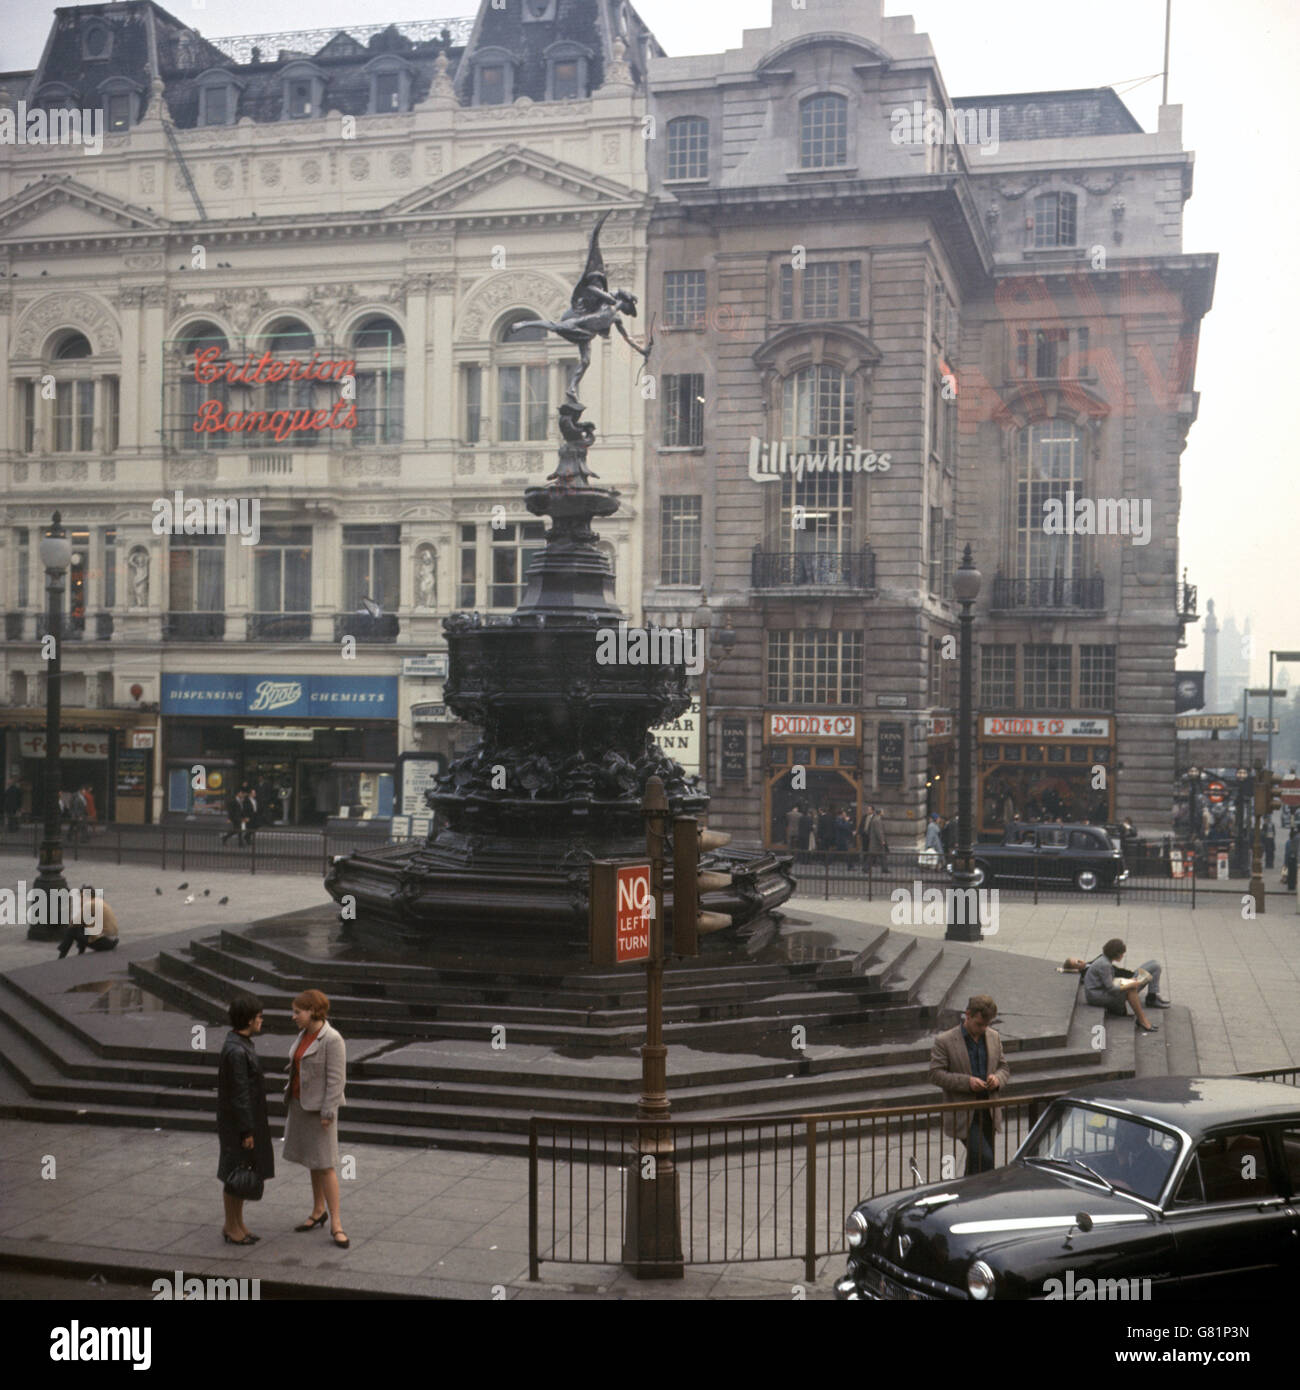 The Statue of Eros in Piccadilly Circus. The fountain was erected in 1892 as a memorial is to commemorate Lord Shaftesbury. The statuette on top is actually Anteros, twin brother of Eros. Stock Photo